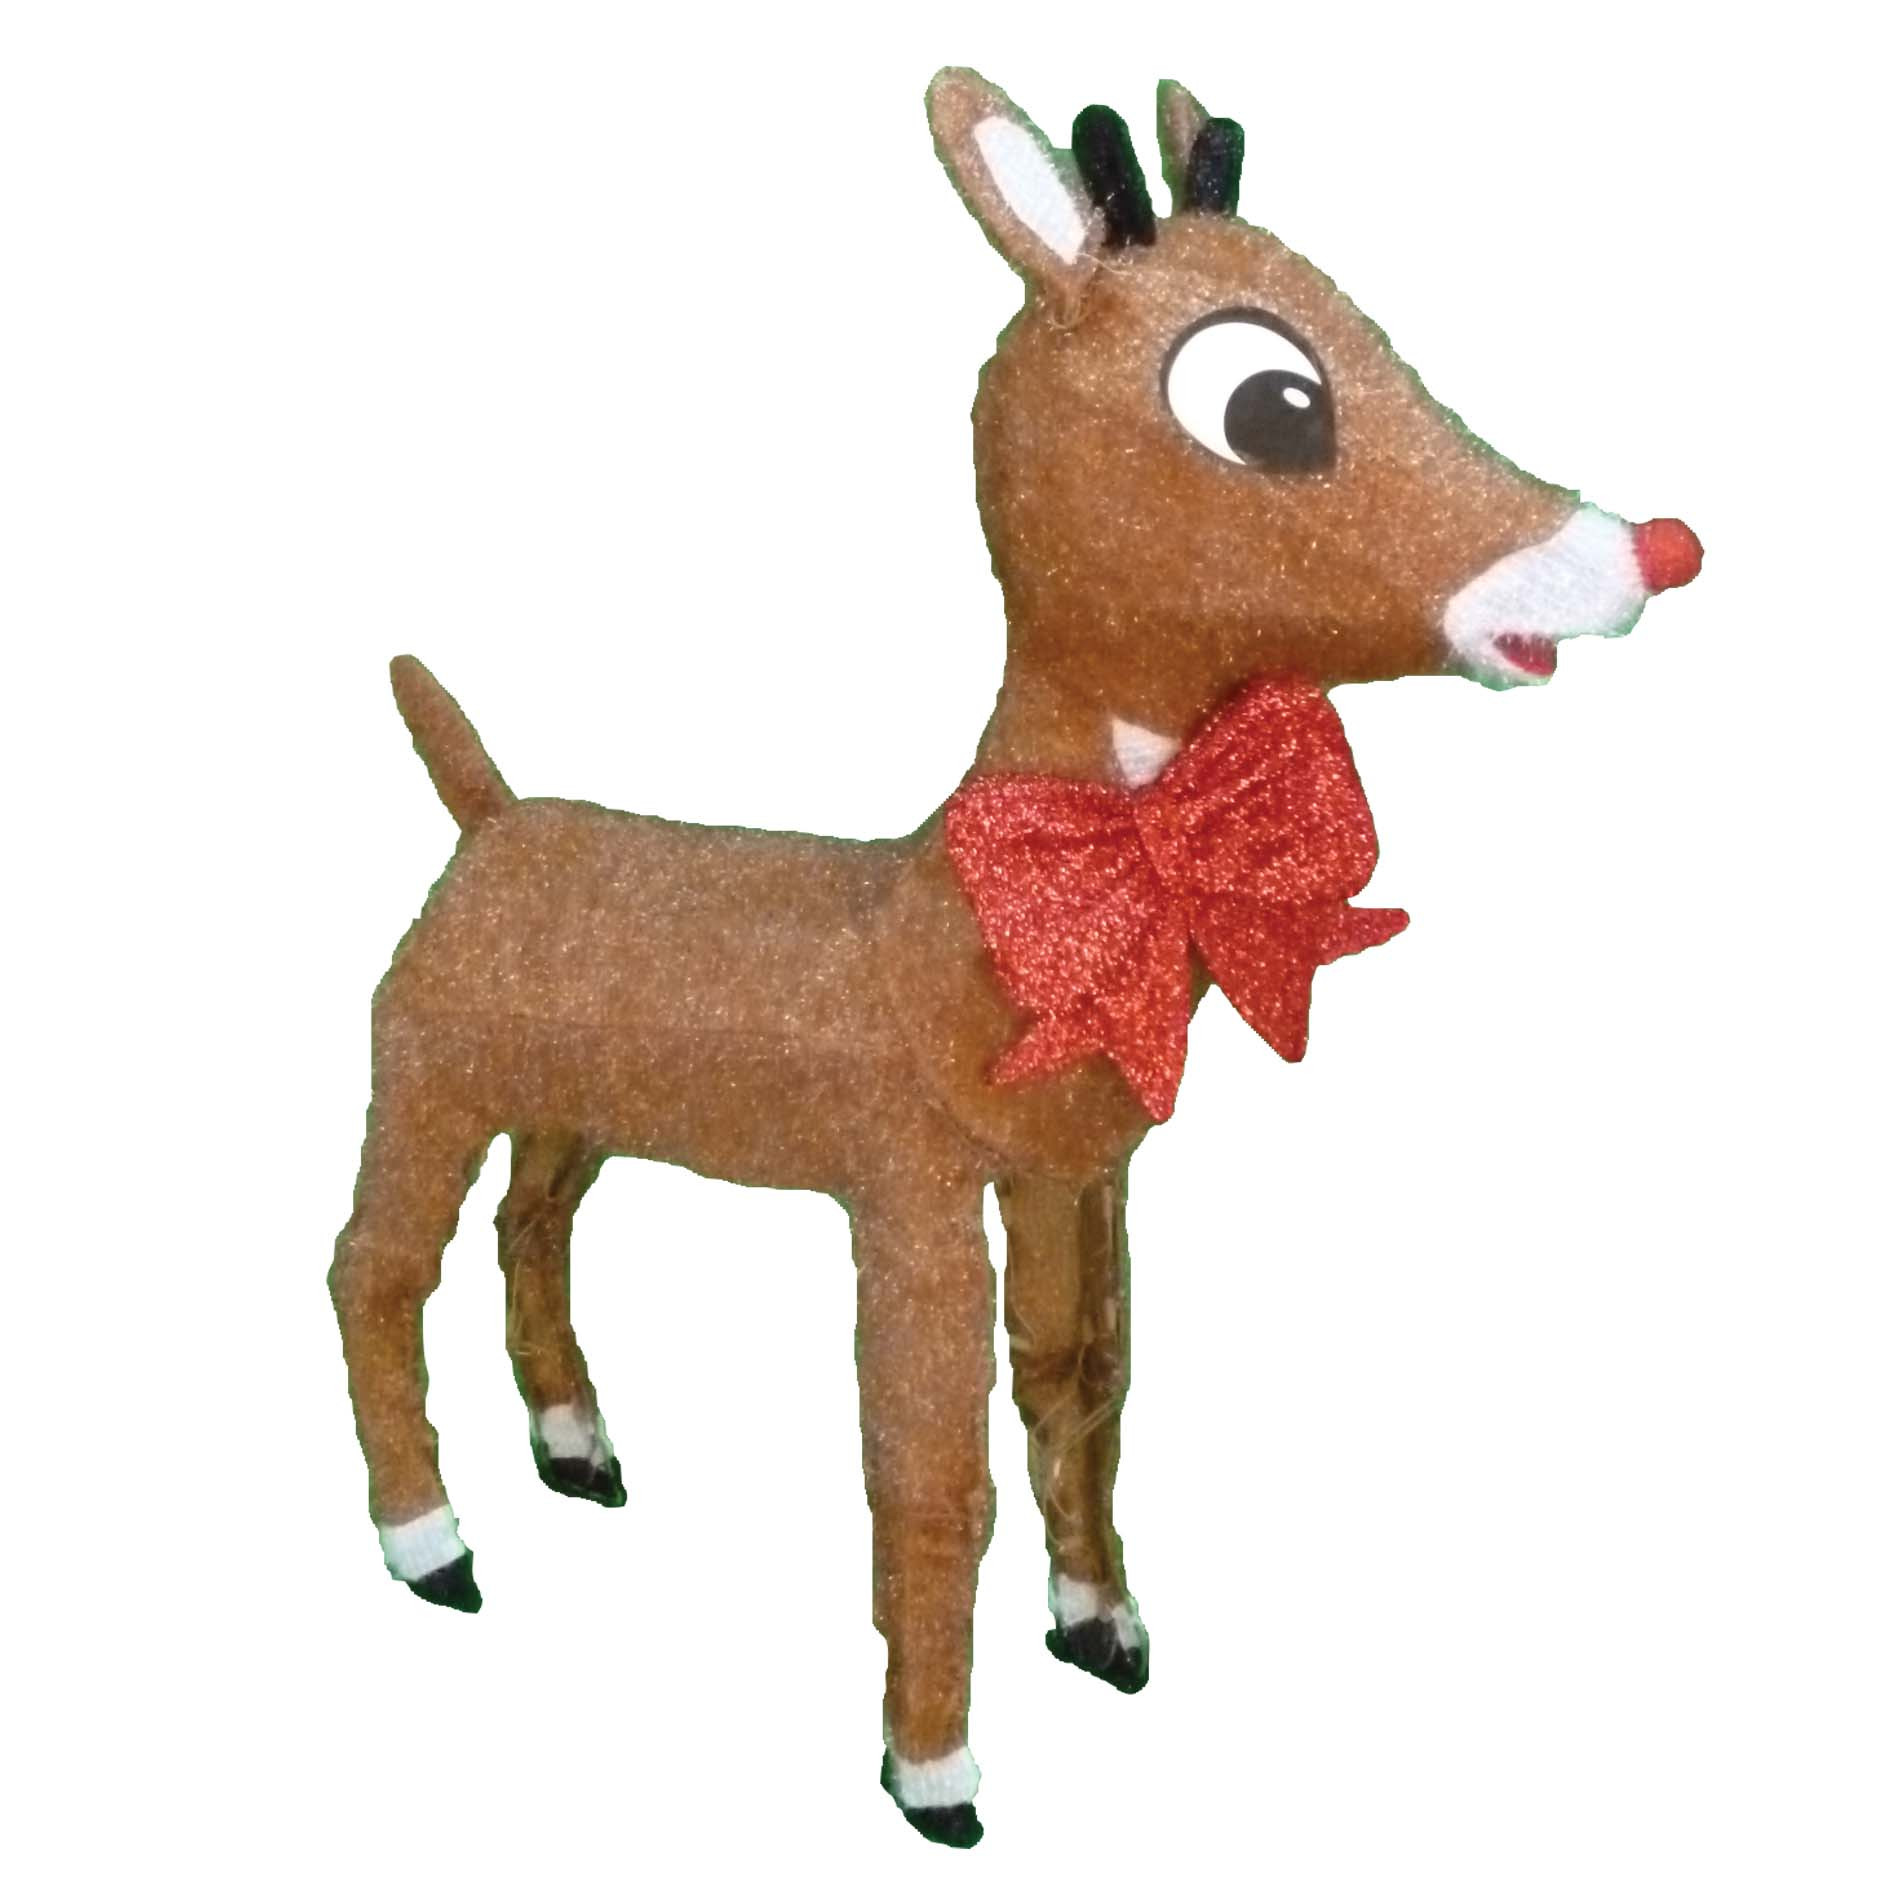 Rudolph Outdoor Christmas Decorations
 Rudolph the Red Nosed Reindeer Lightup Rudolph Outdoor